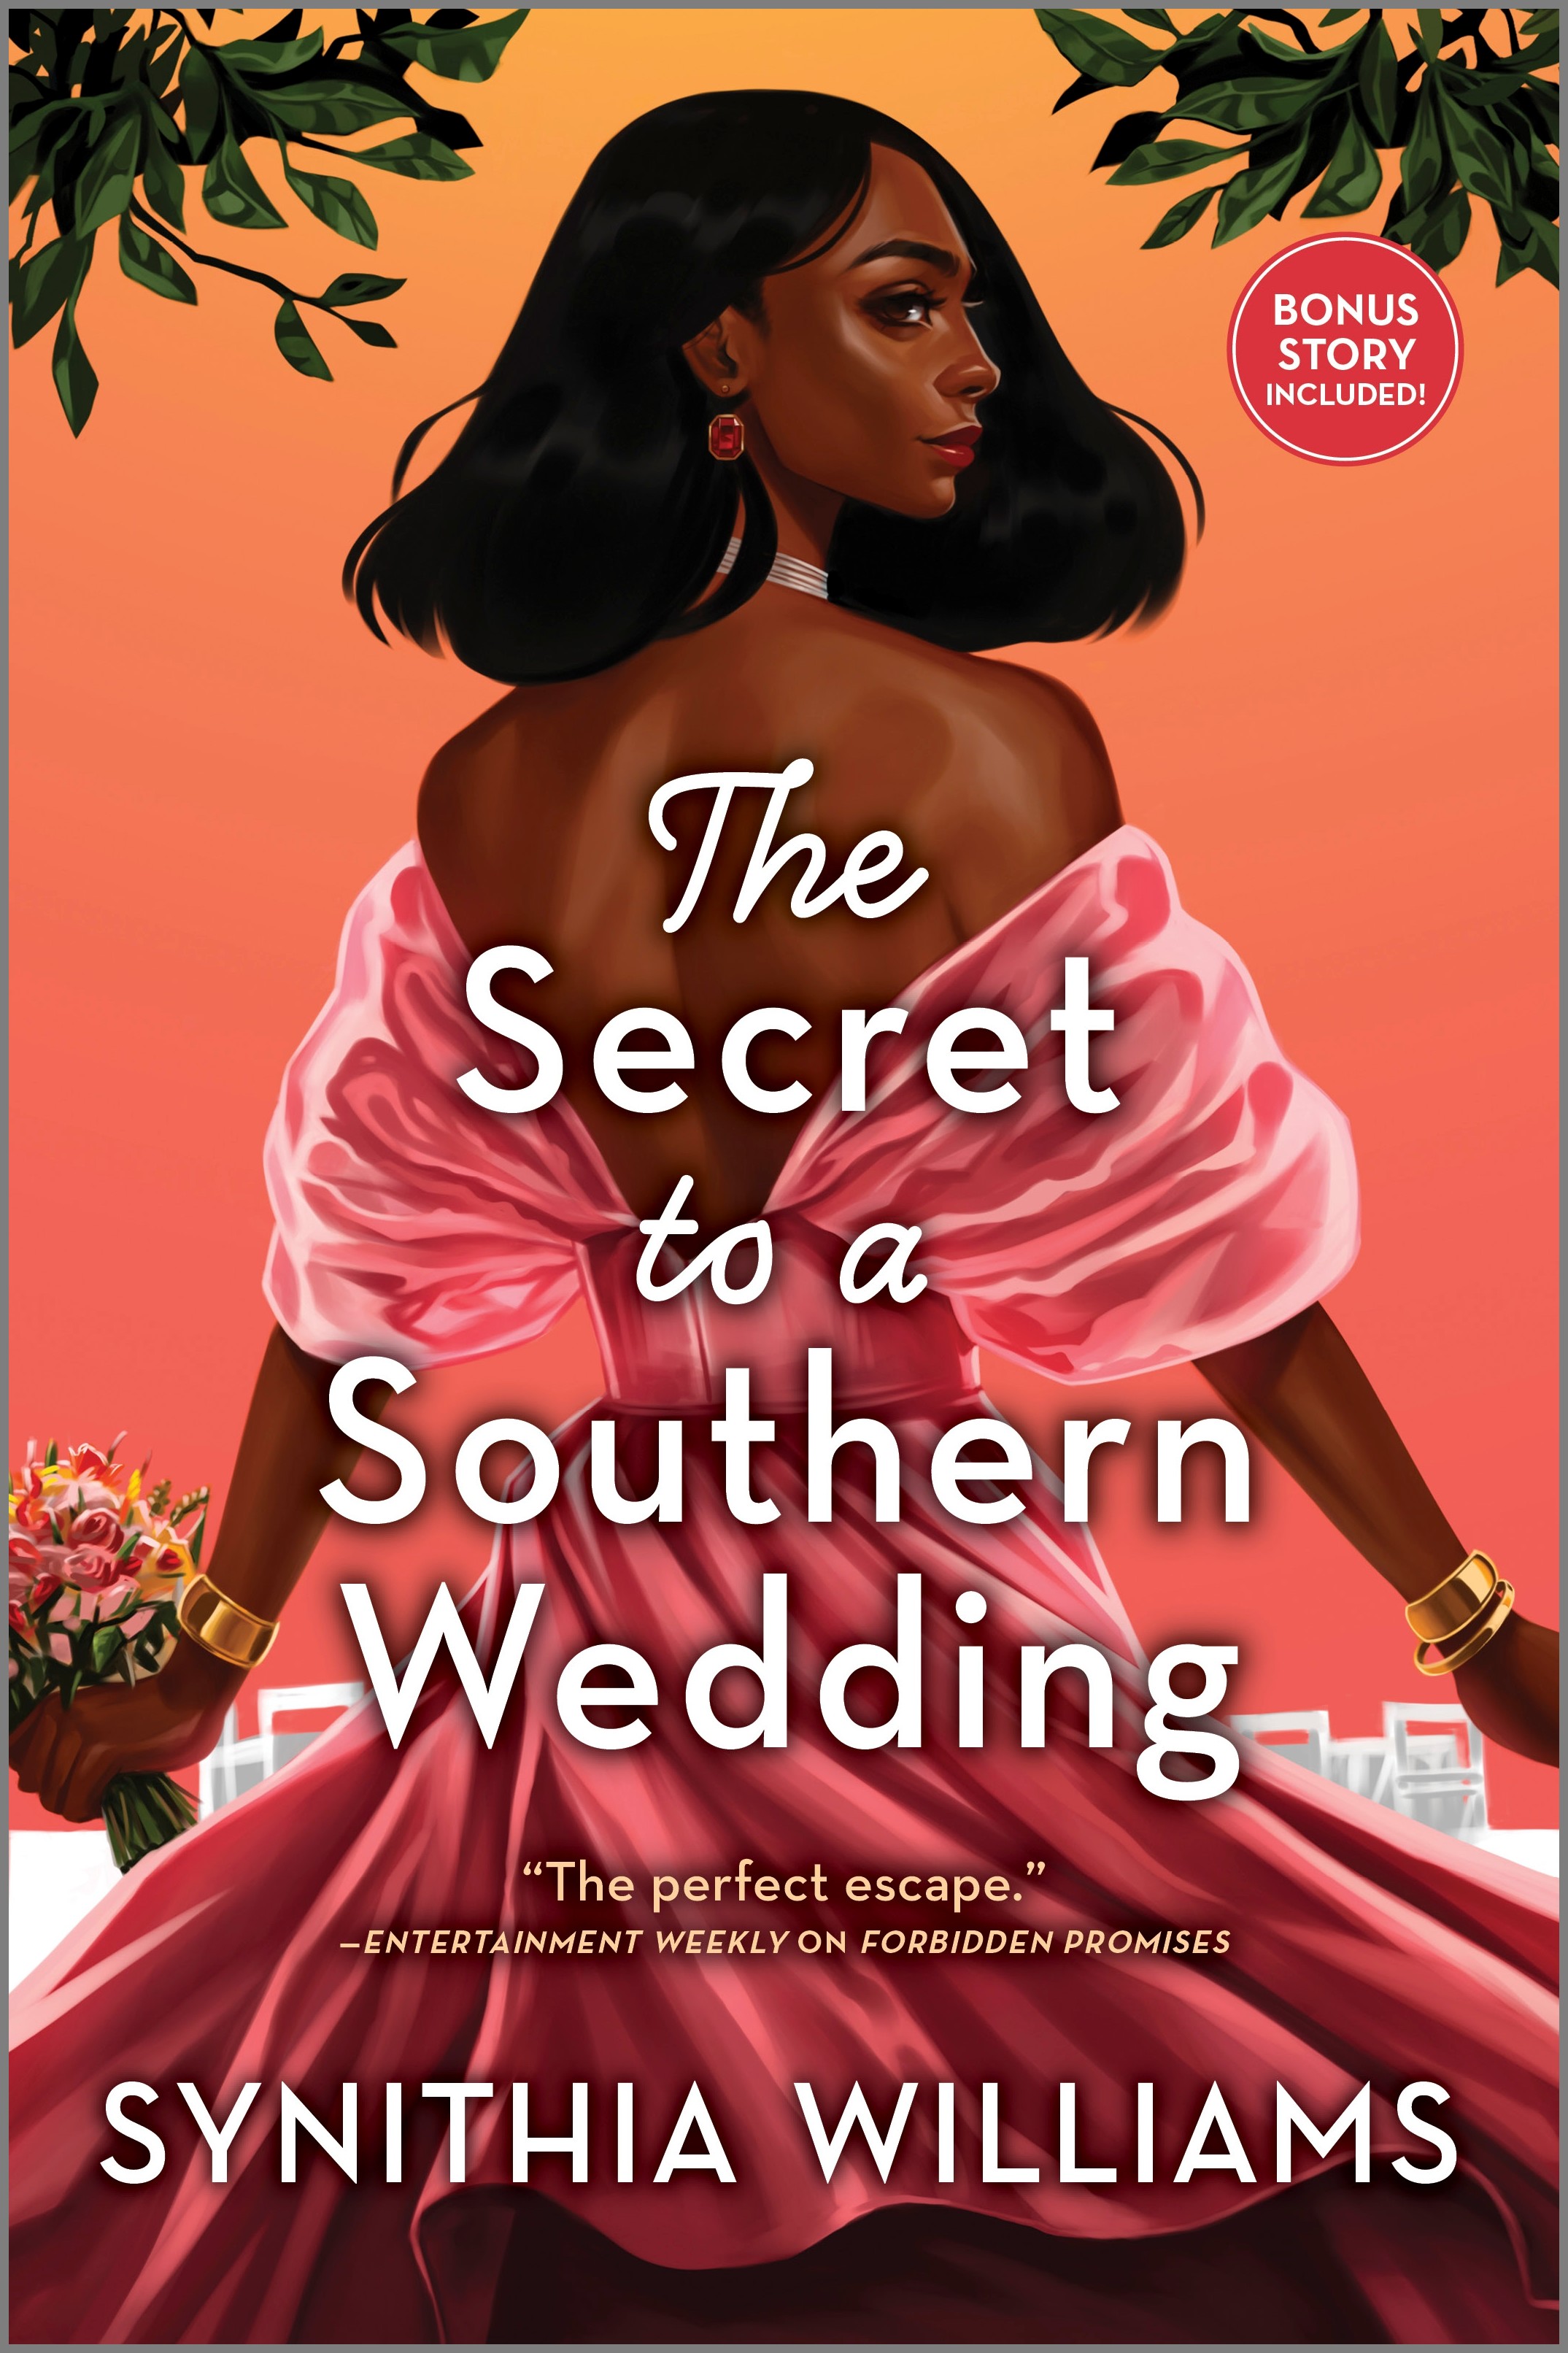 The Secret to a Southern Wedding by Synithia Williams
